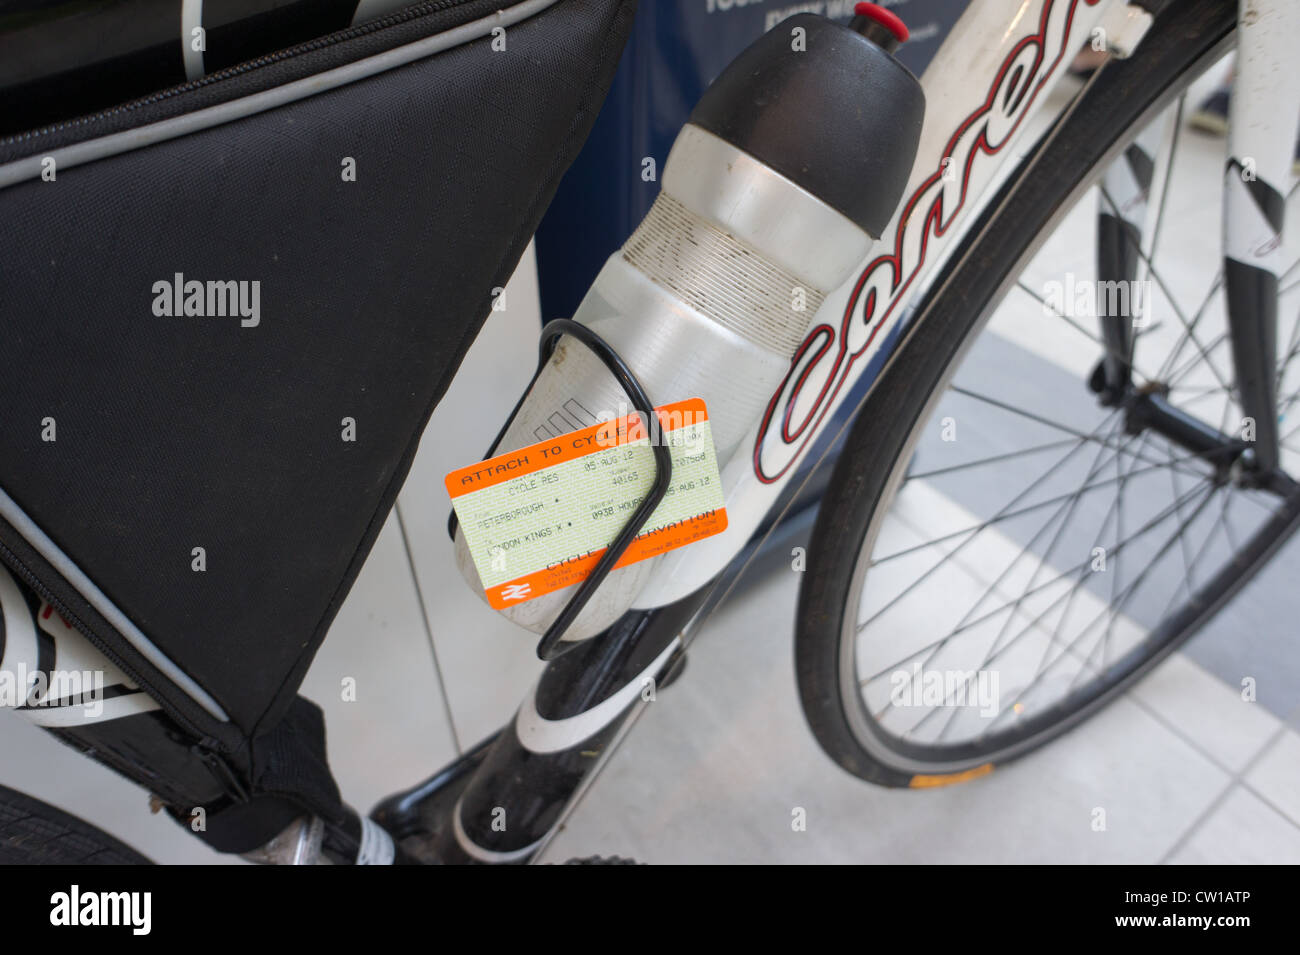 Bicycle with it's own train ticket Stock Photo